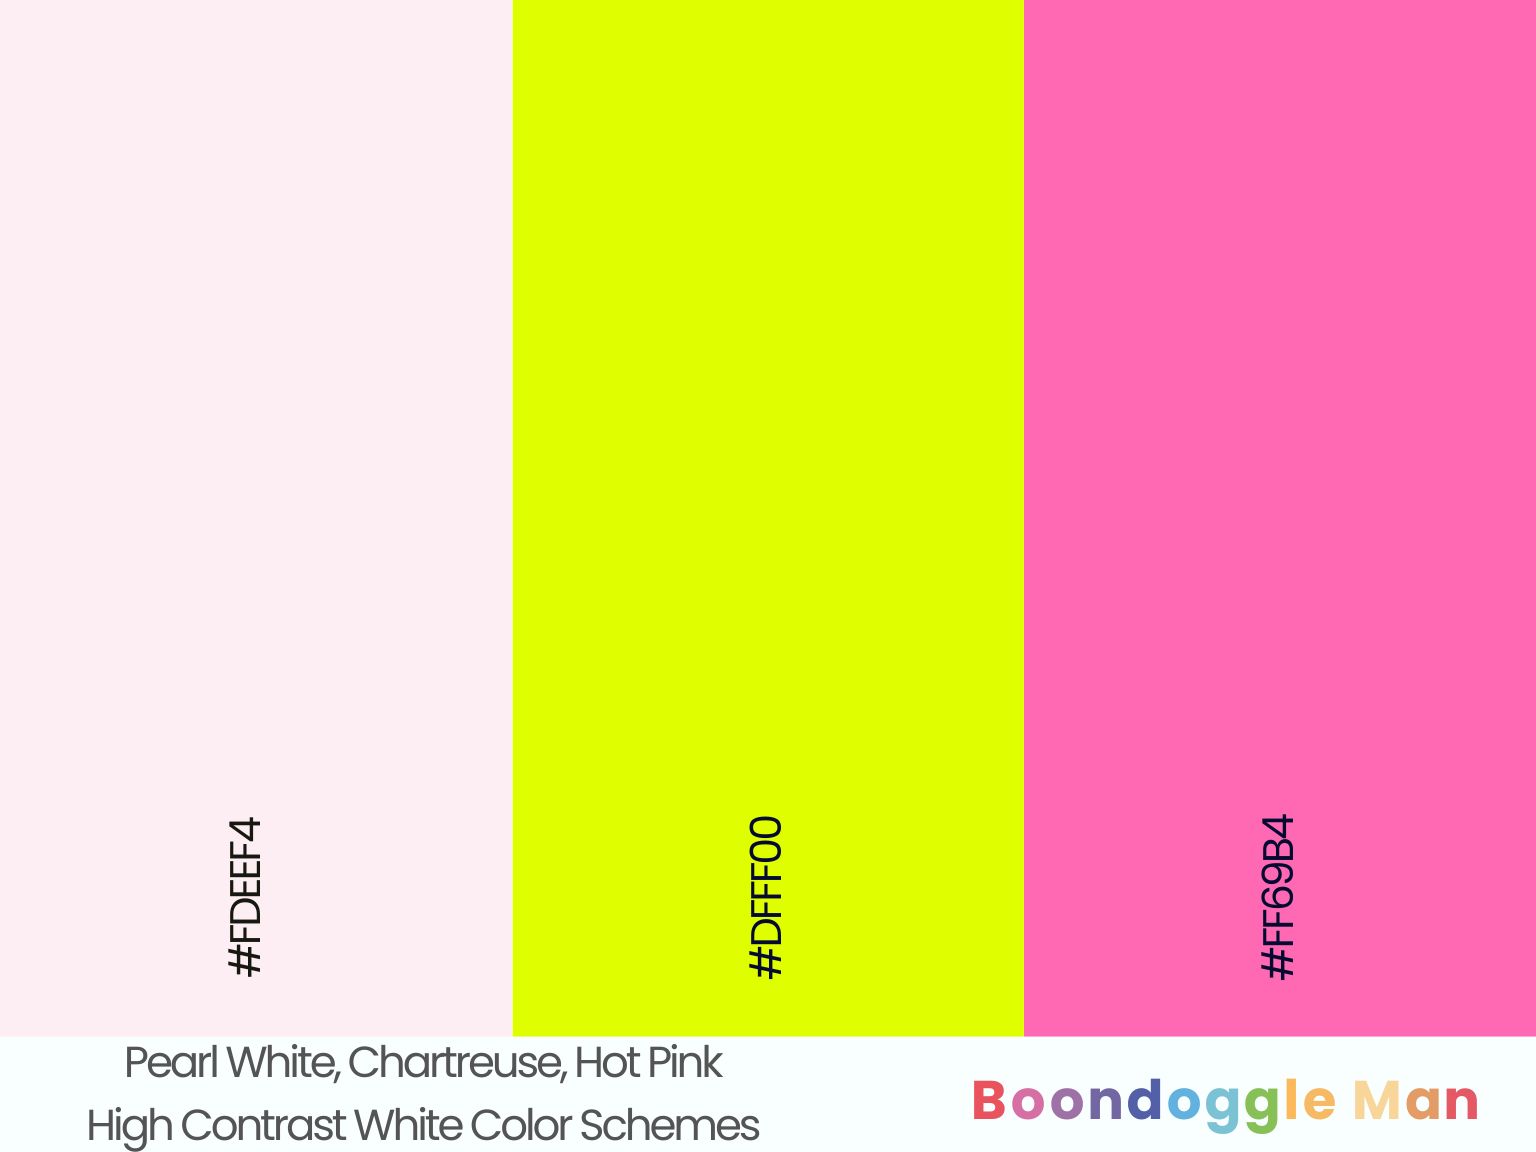 Pearl White, Chartreuse, Hot Pink